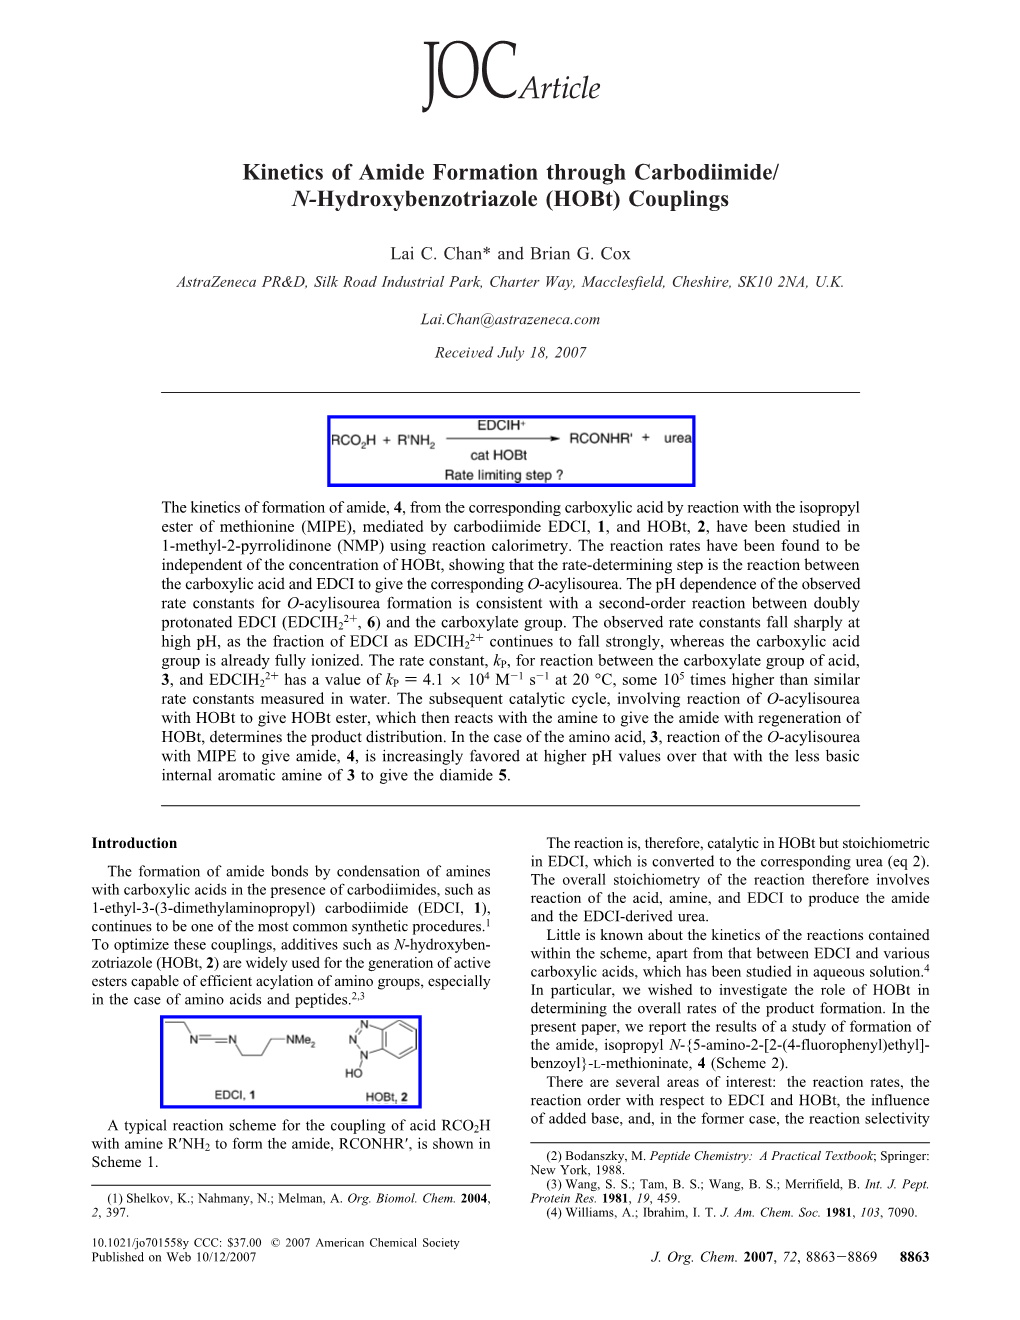 Kinetics of Amide Formation Through Carbodiimide/ N-Hydroxybenzotriazole (Hobt) Couplings